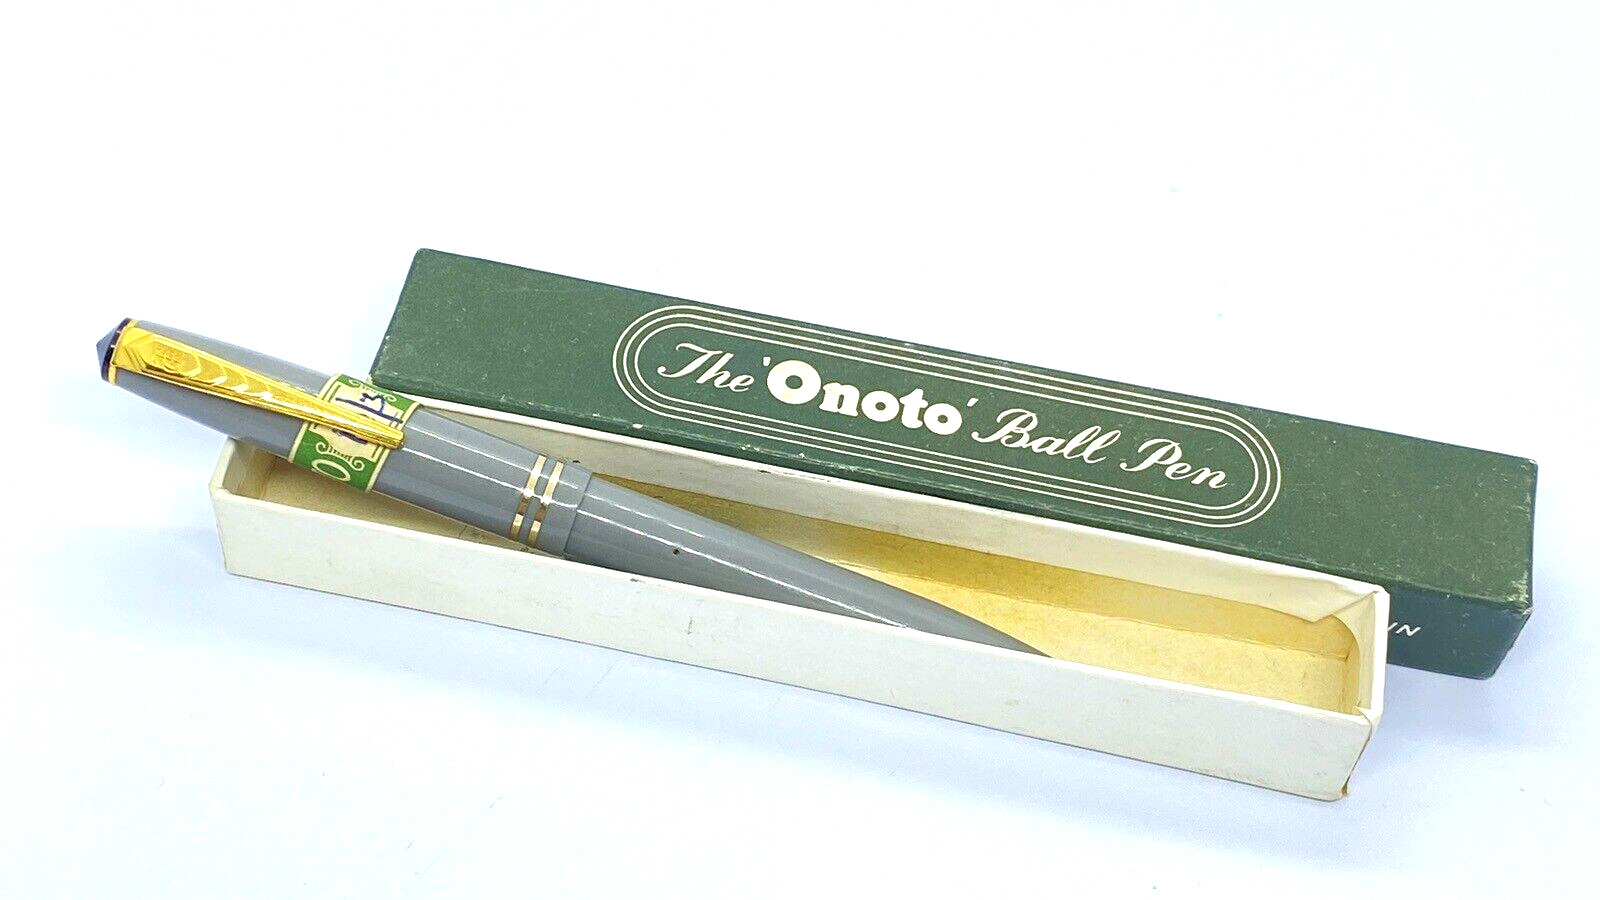 ONOTO THE BALL PEN SOLID GRAY IN ORIGINAL BOX MADE IN ENGLAND